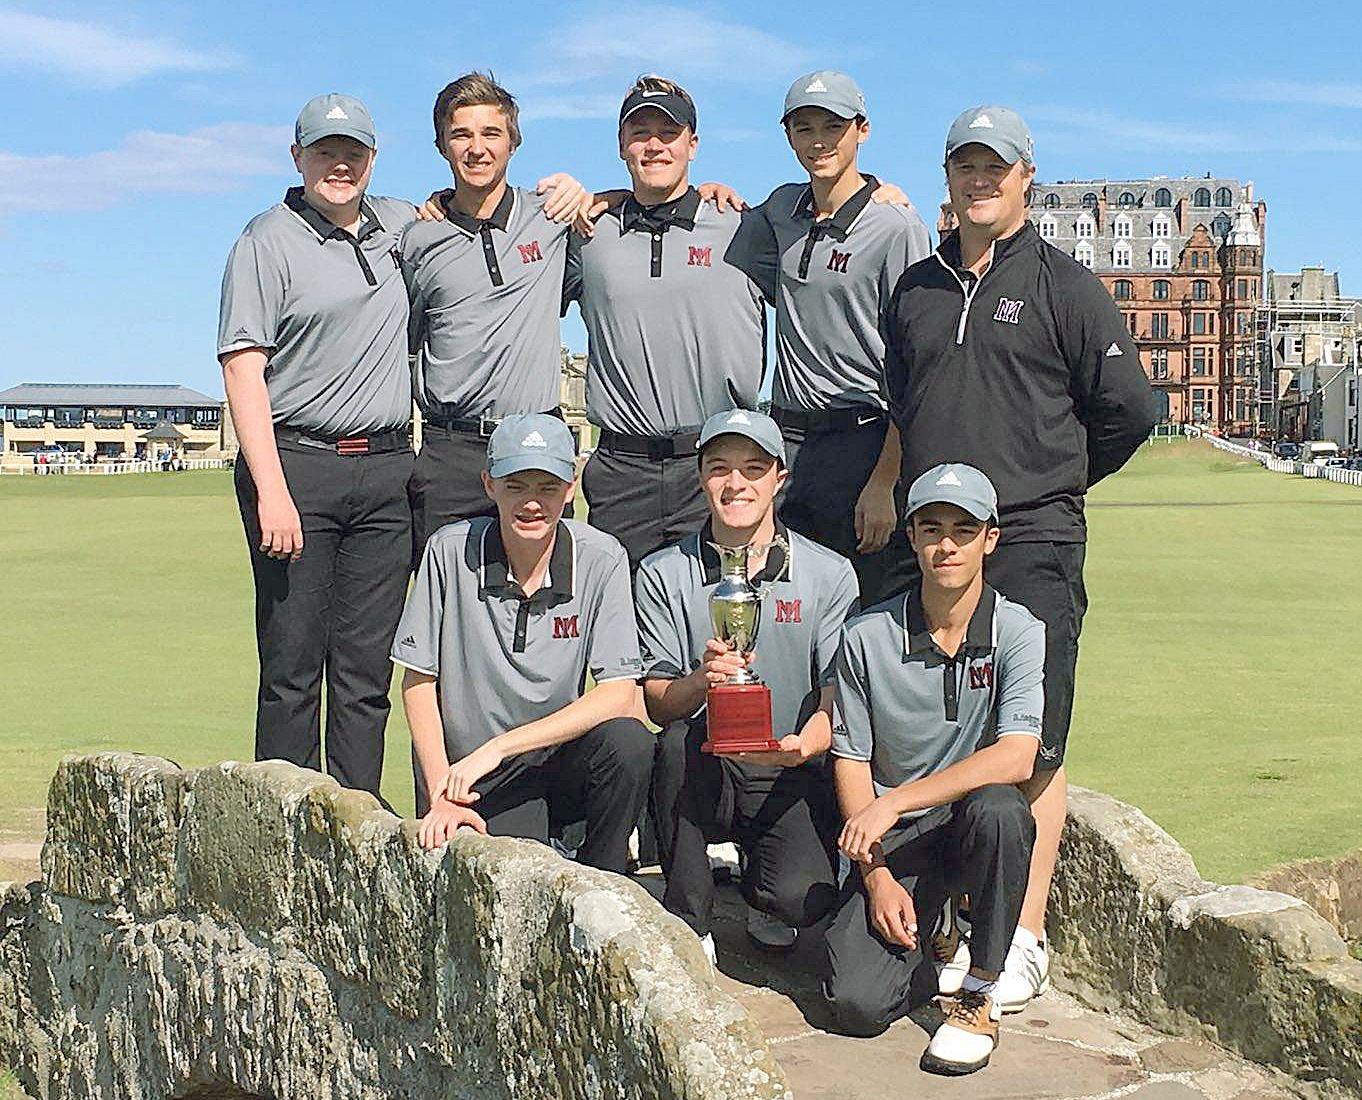 Members of last year’s Mercer Island boys varsity golf team show off their trophy after winning the American High School Golf Championships in Scotland earlier this month. From left